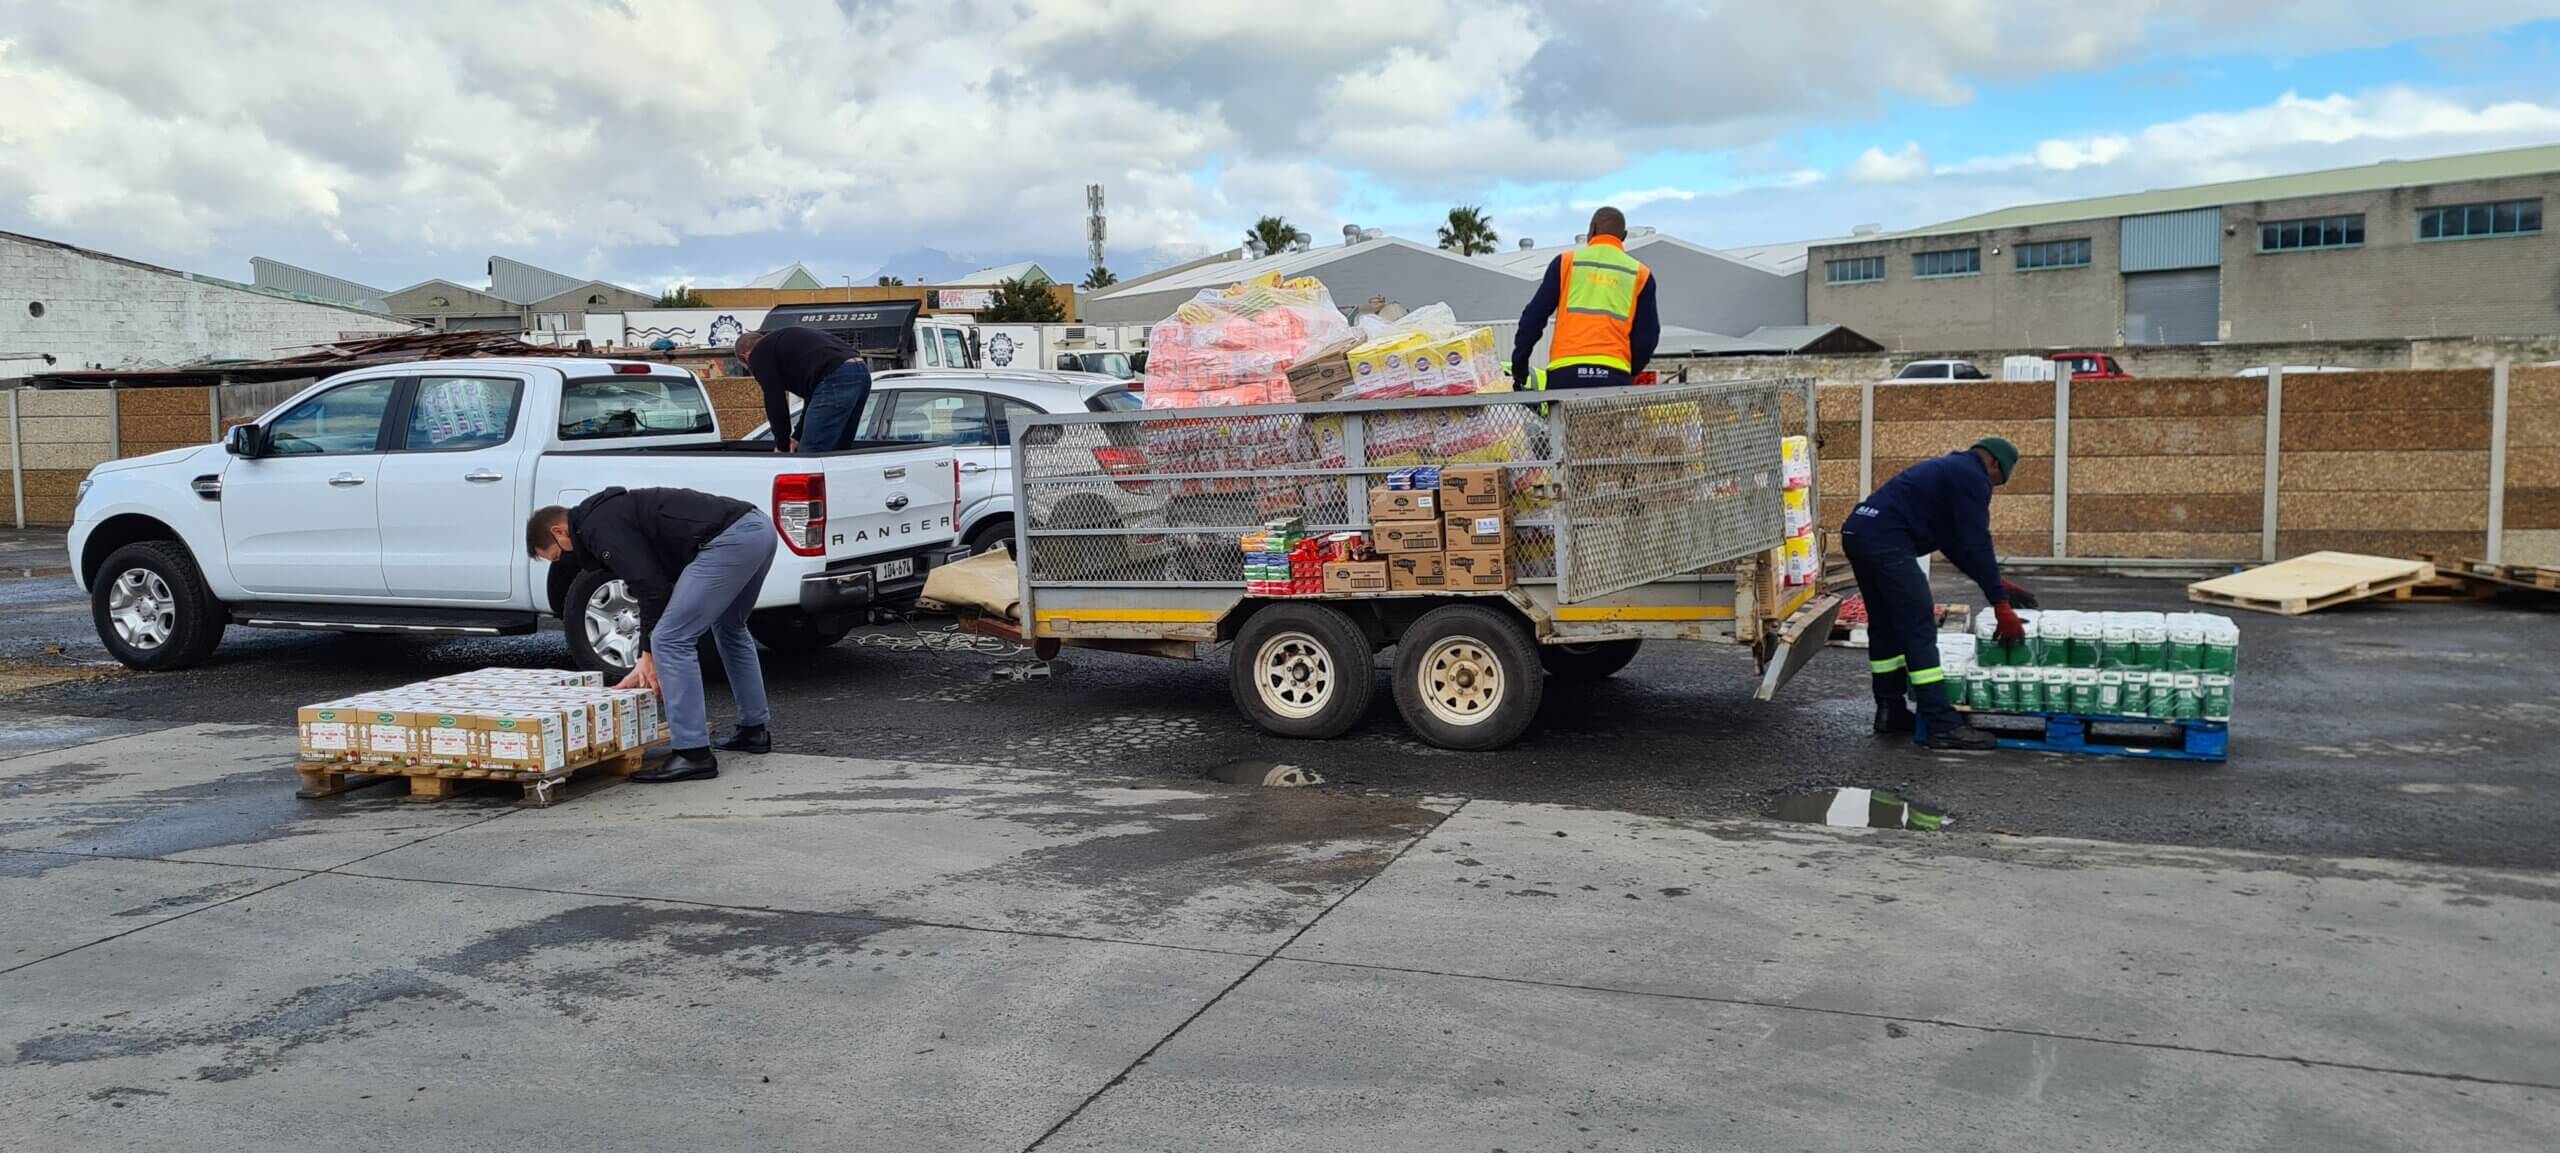 Scott Bader South Africa colleagues come together to deliver food and essential items following political protests